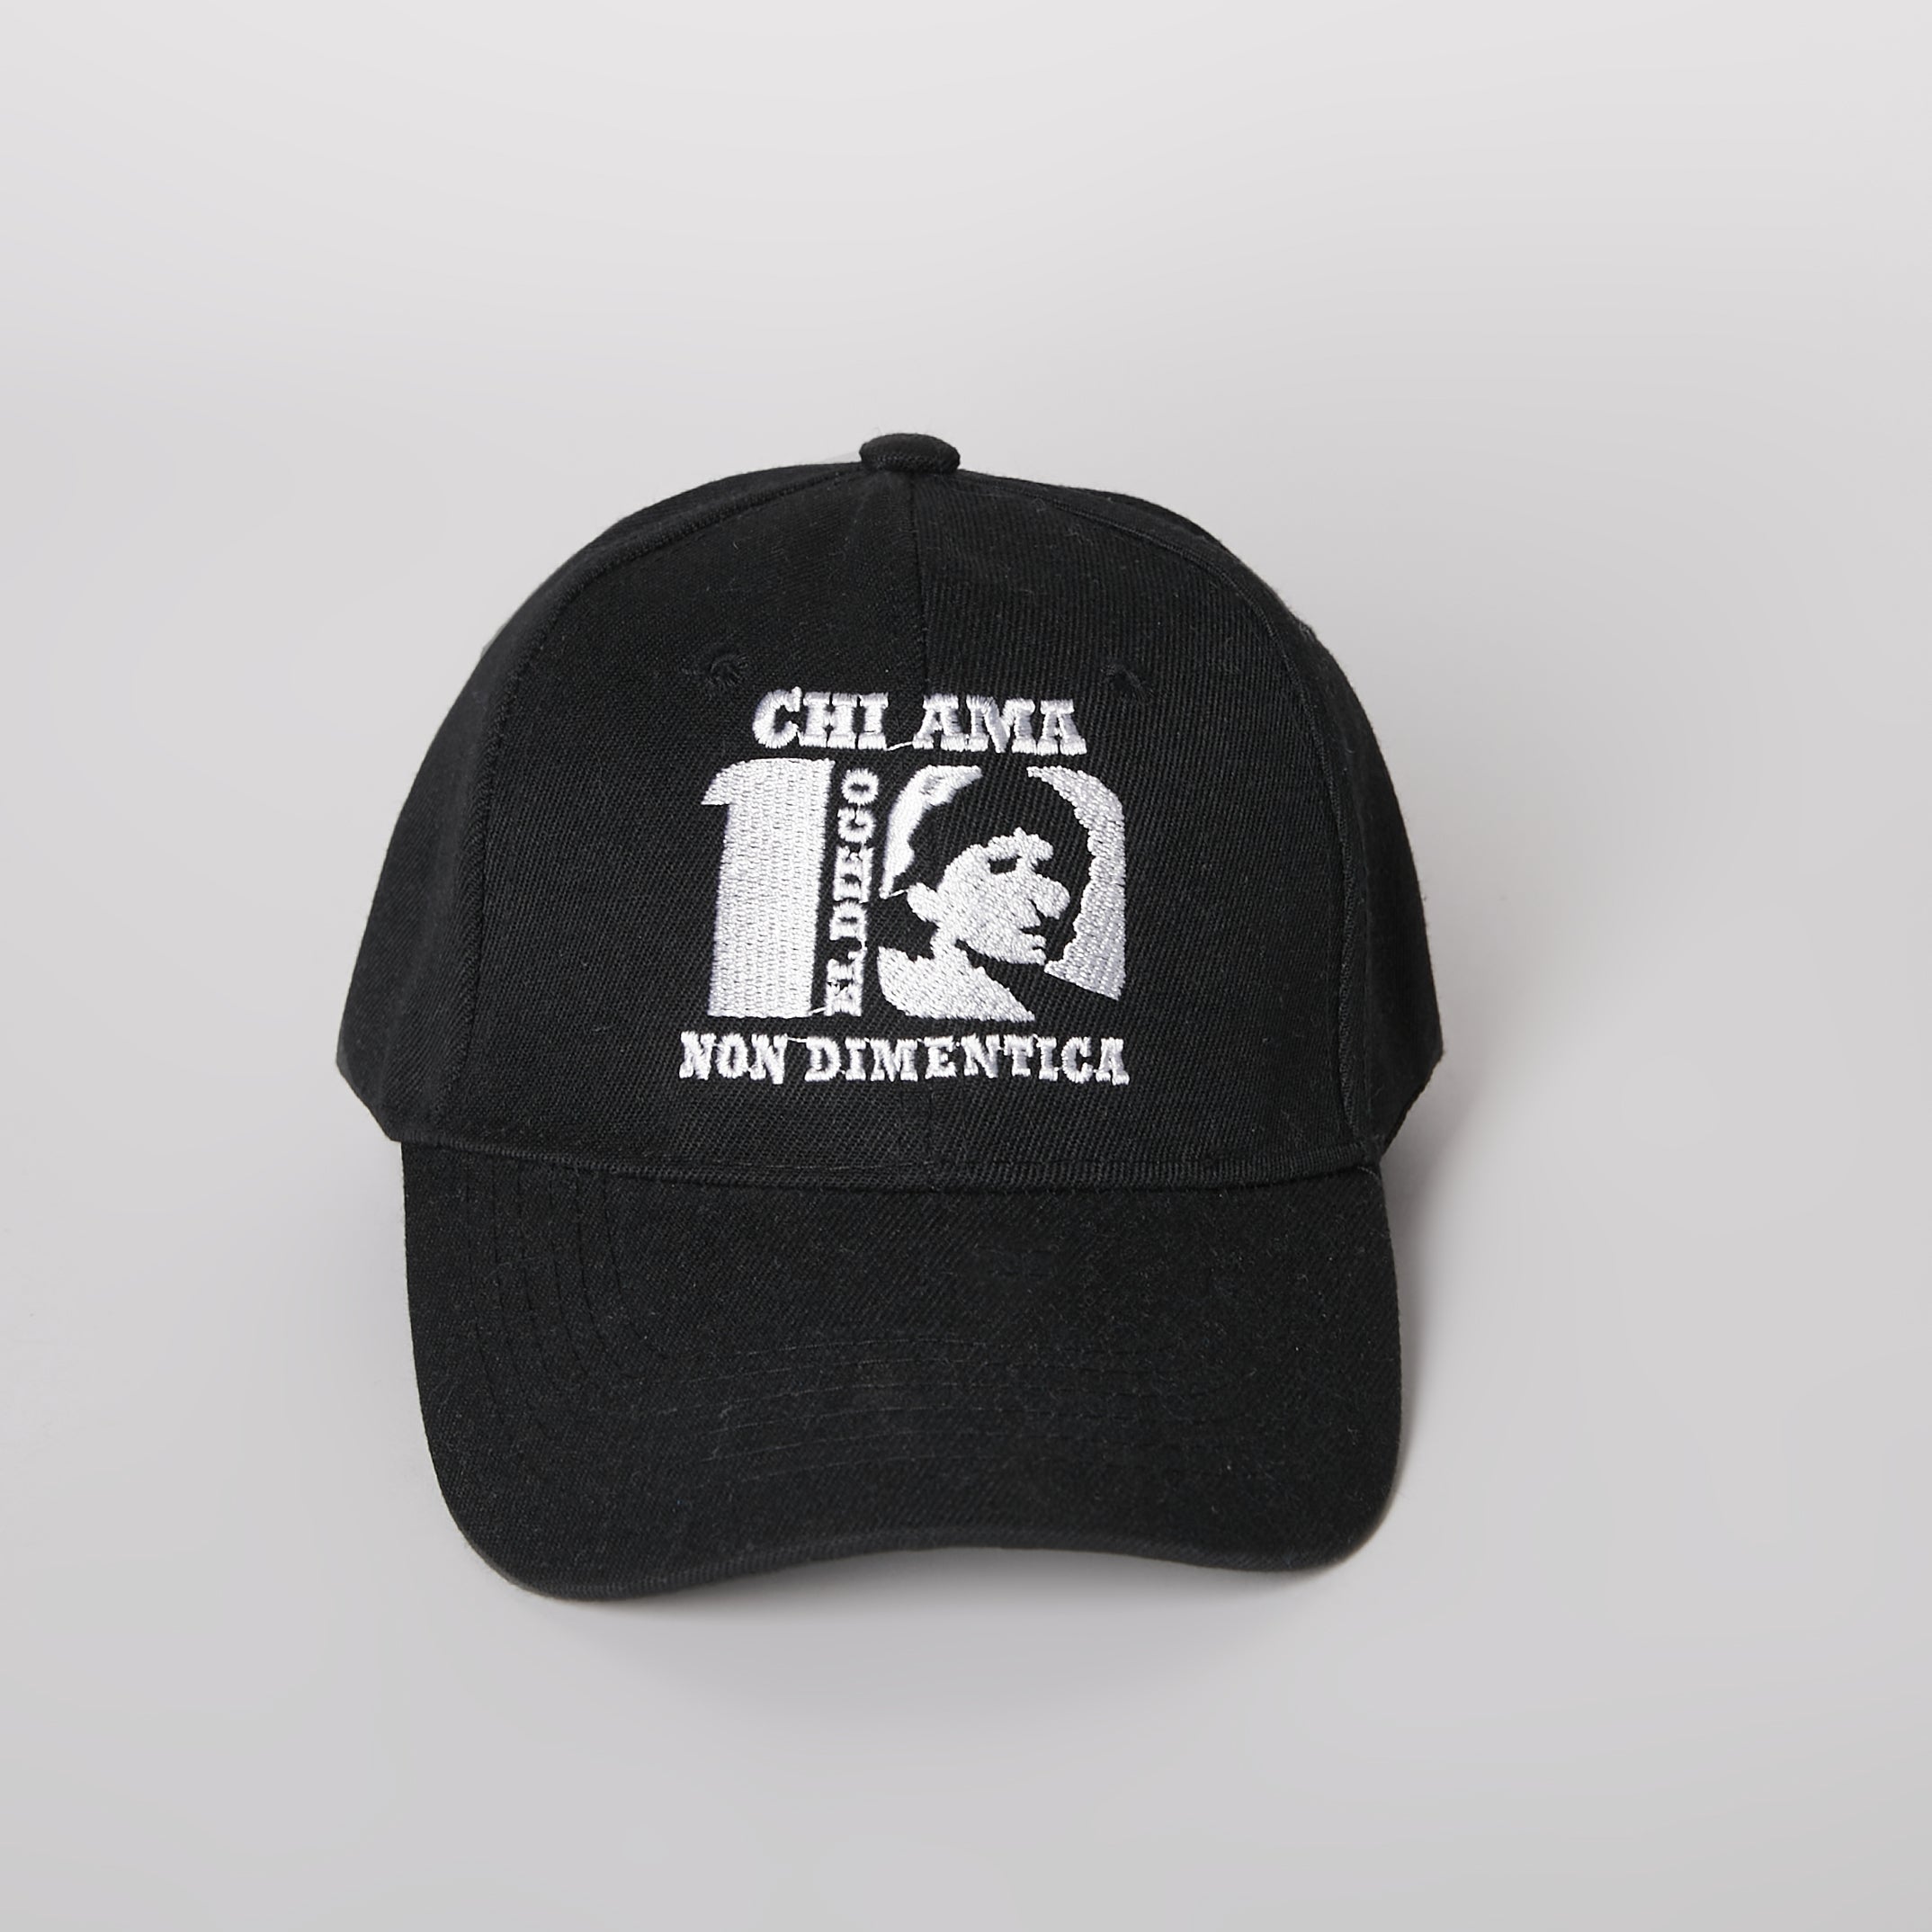 MARADONA HAT "HE WHO LOVES DOESN'T FORGET"